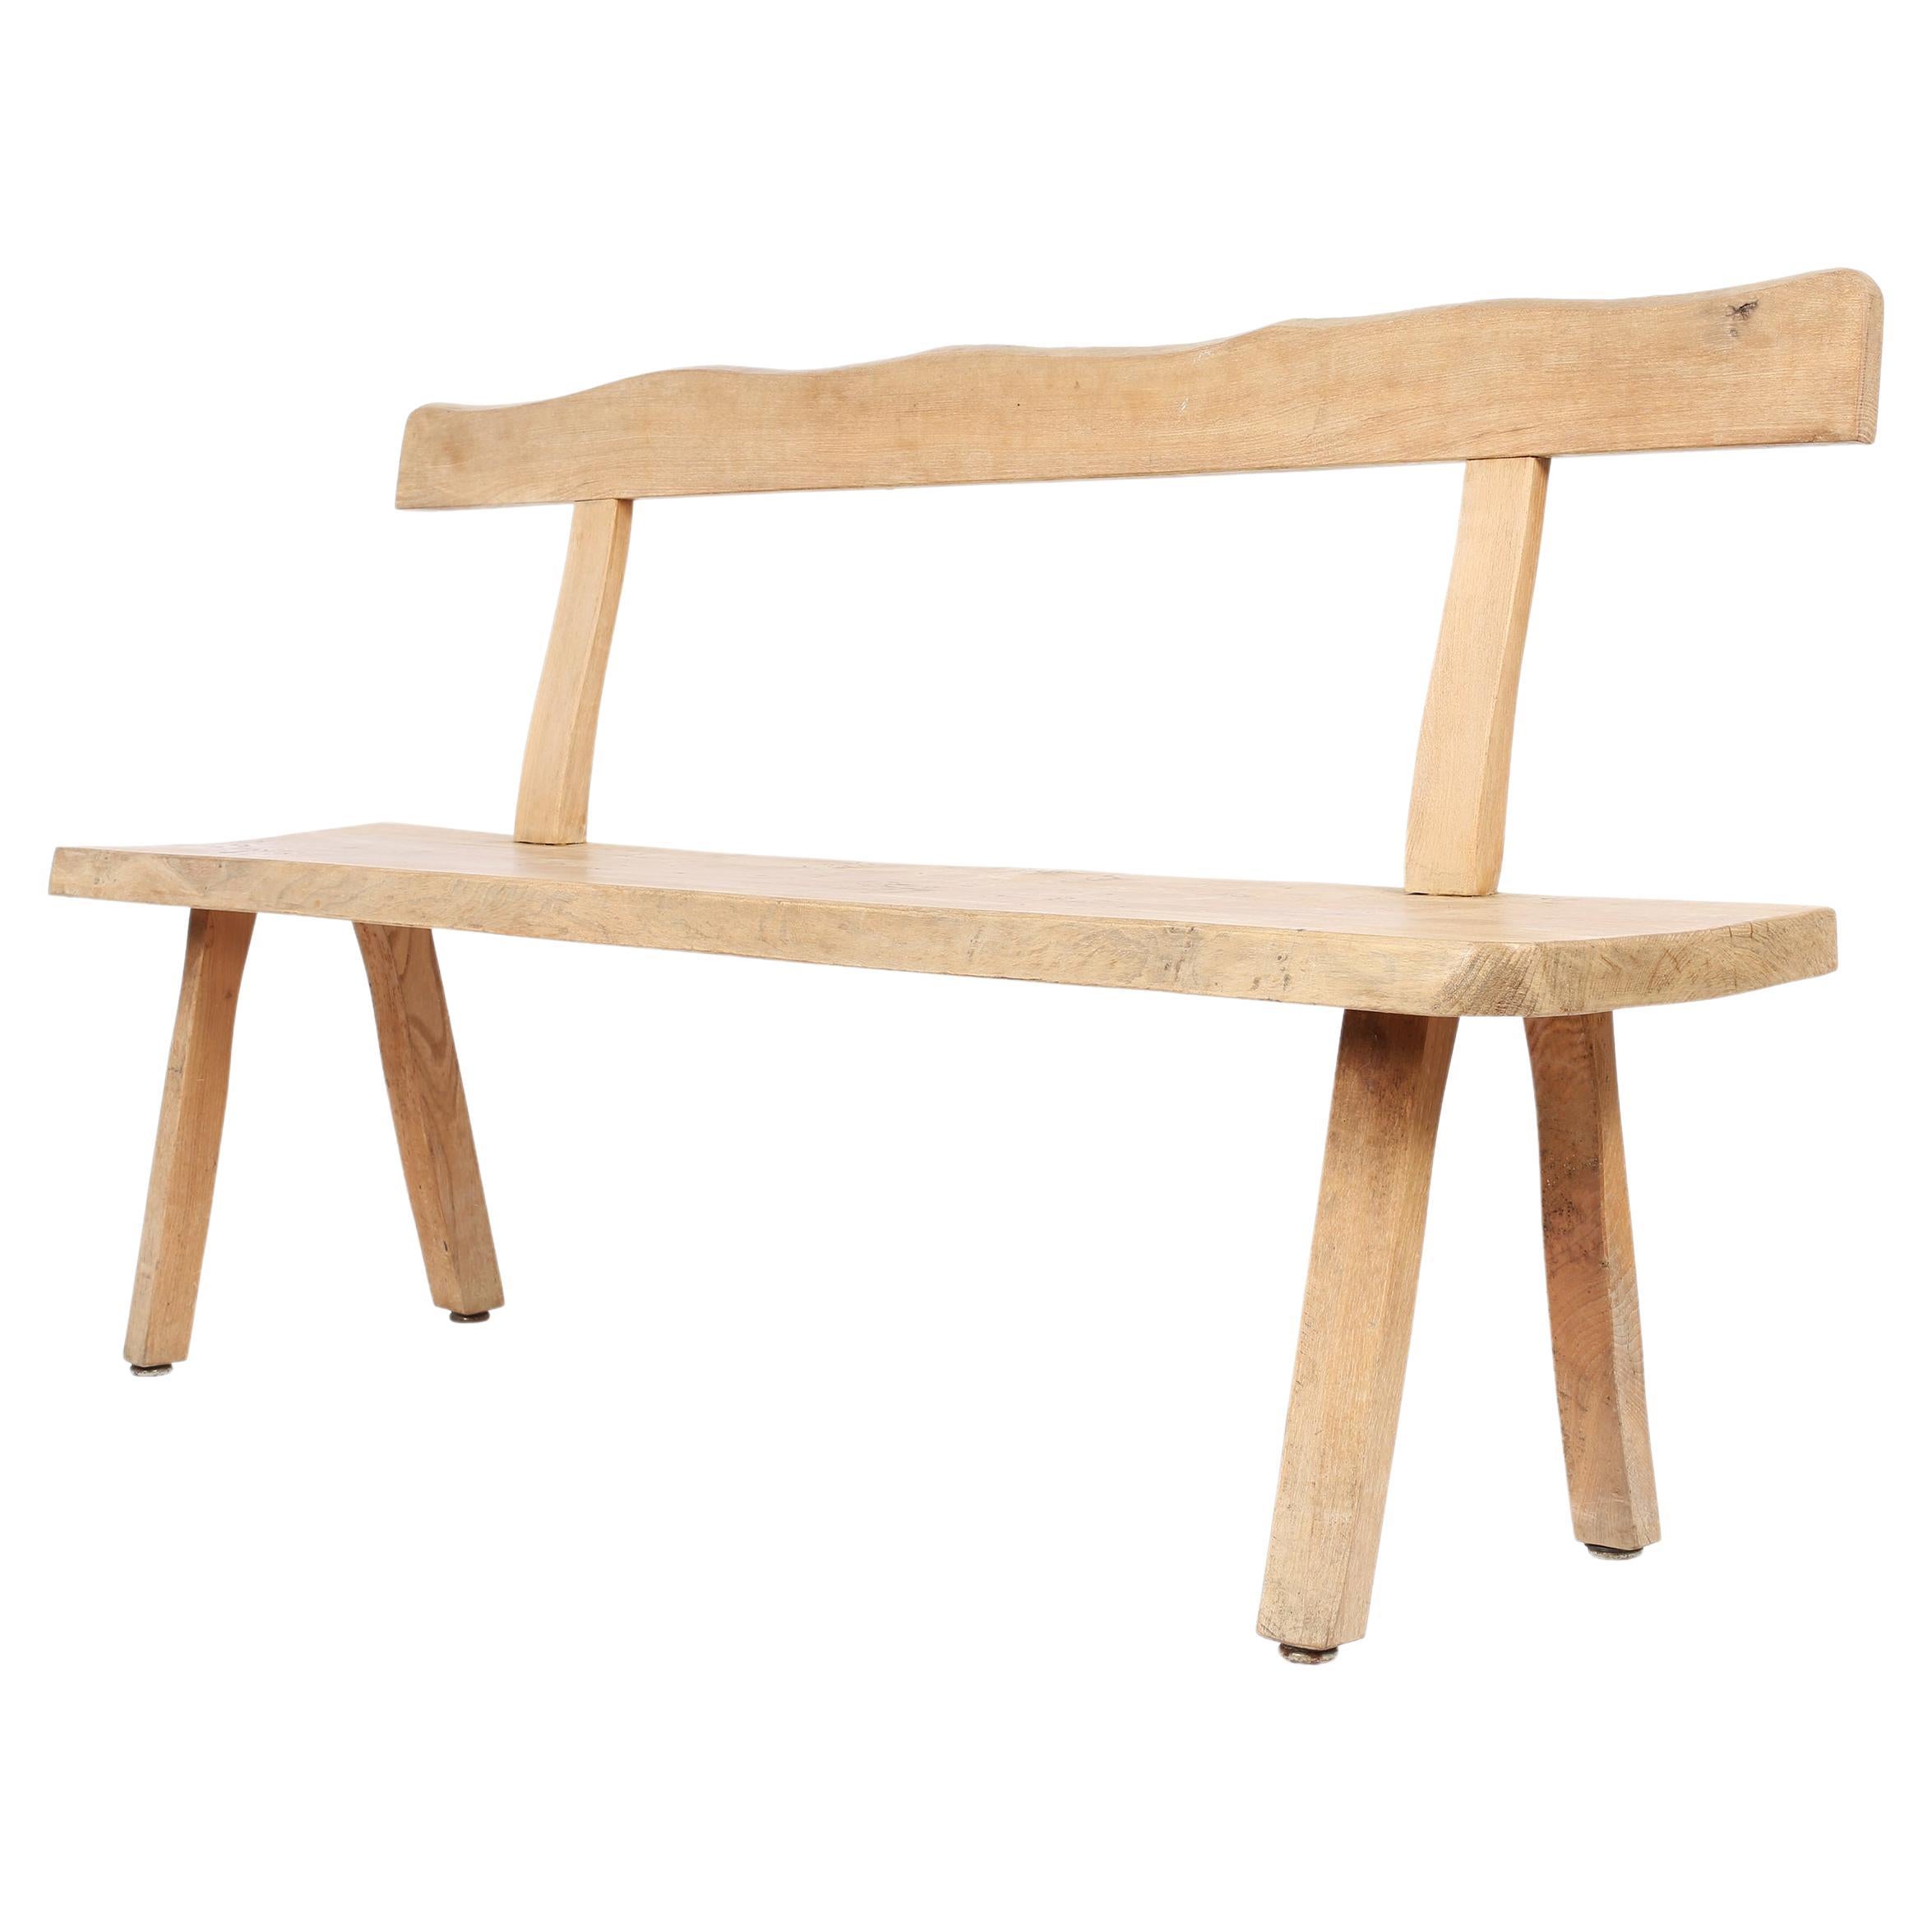 Solid Elm Bench Attributed to Olavi Hanninen, C. 1960s For Sale